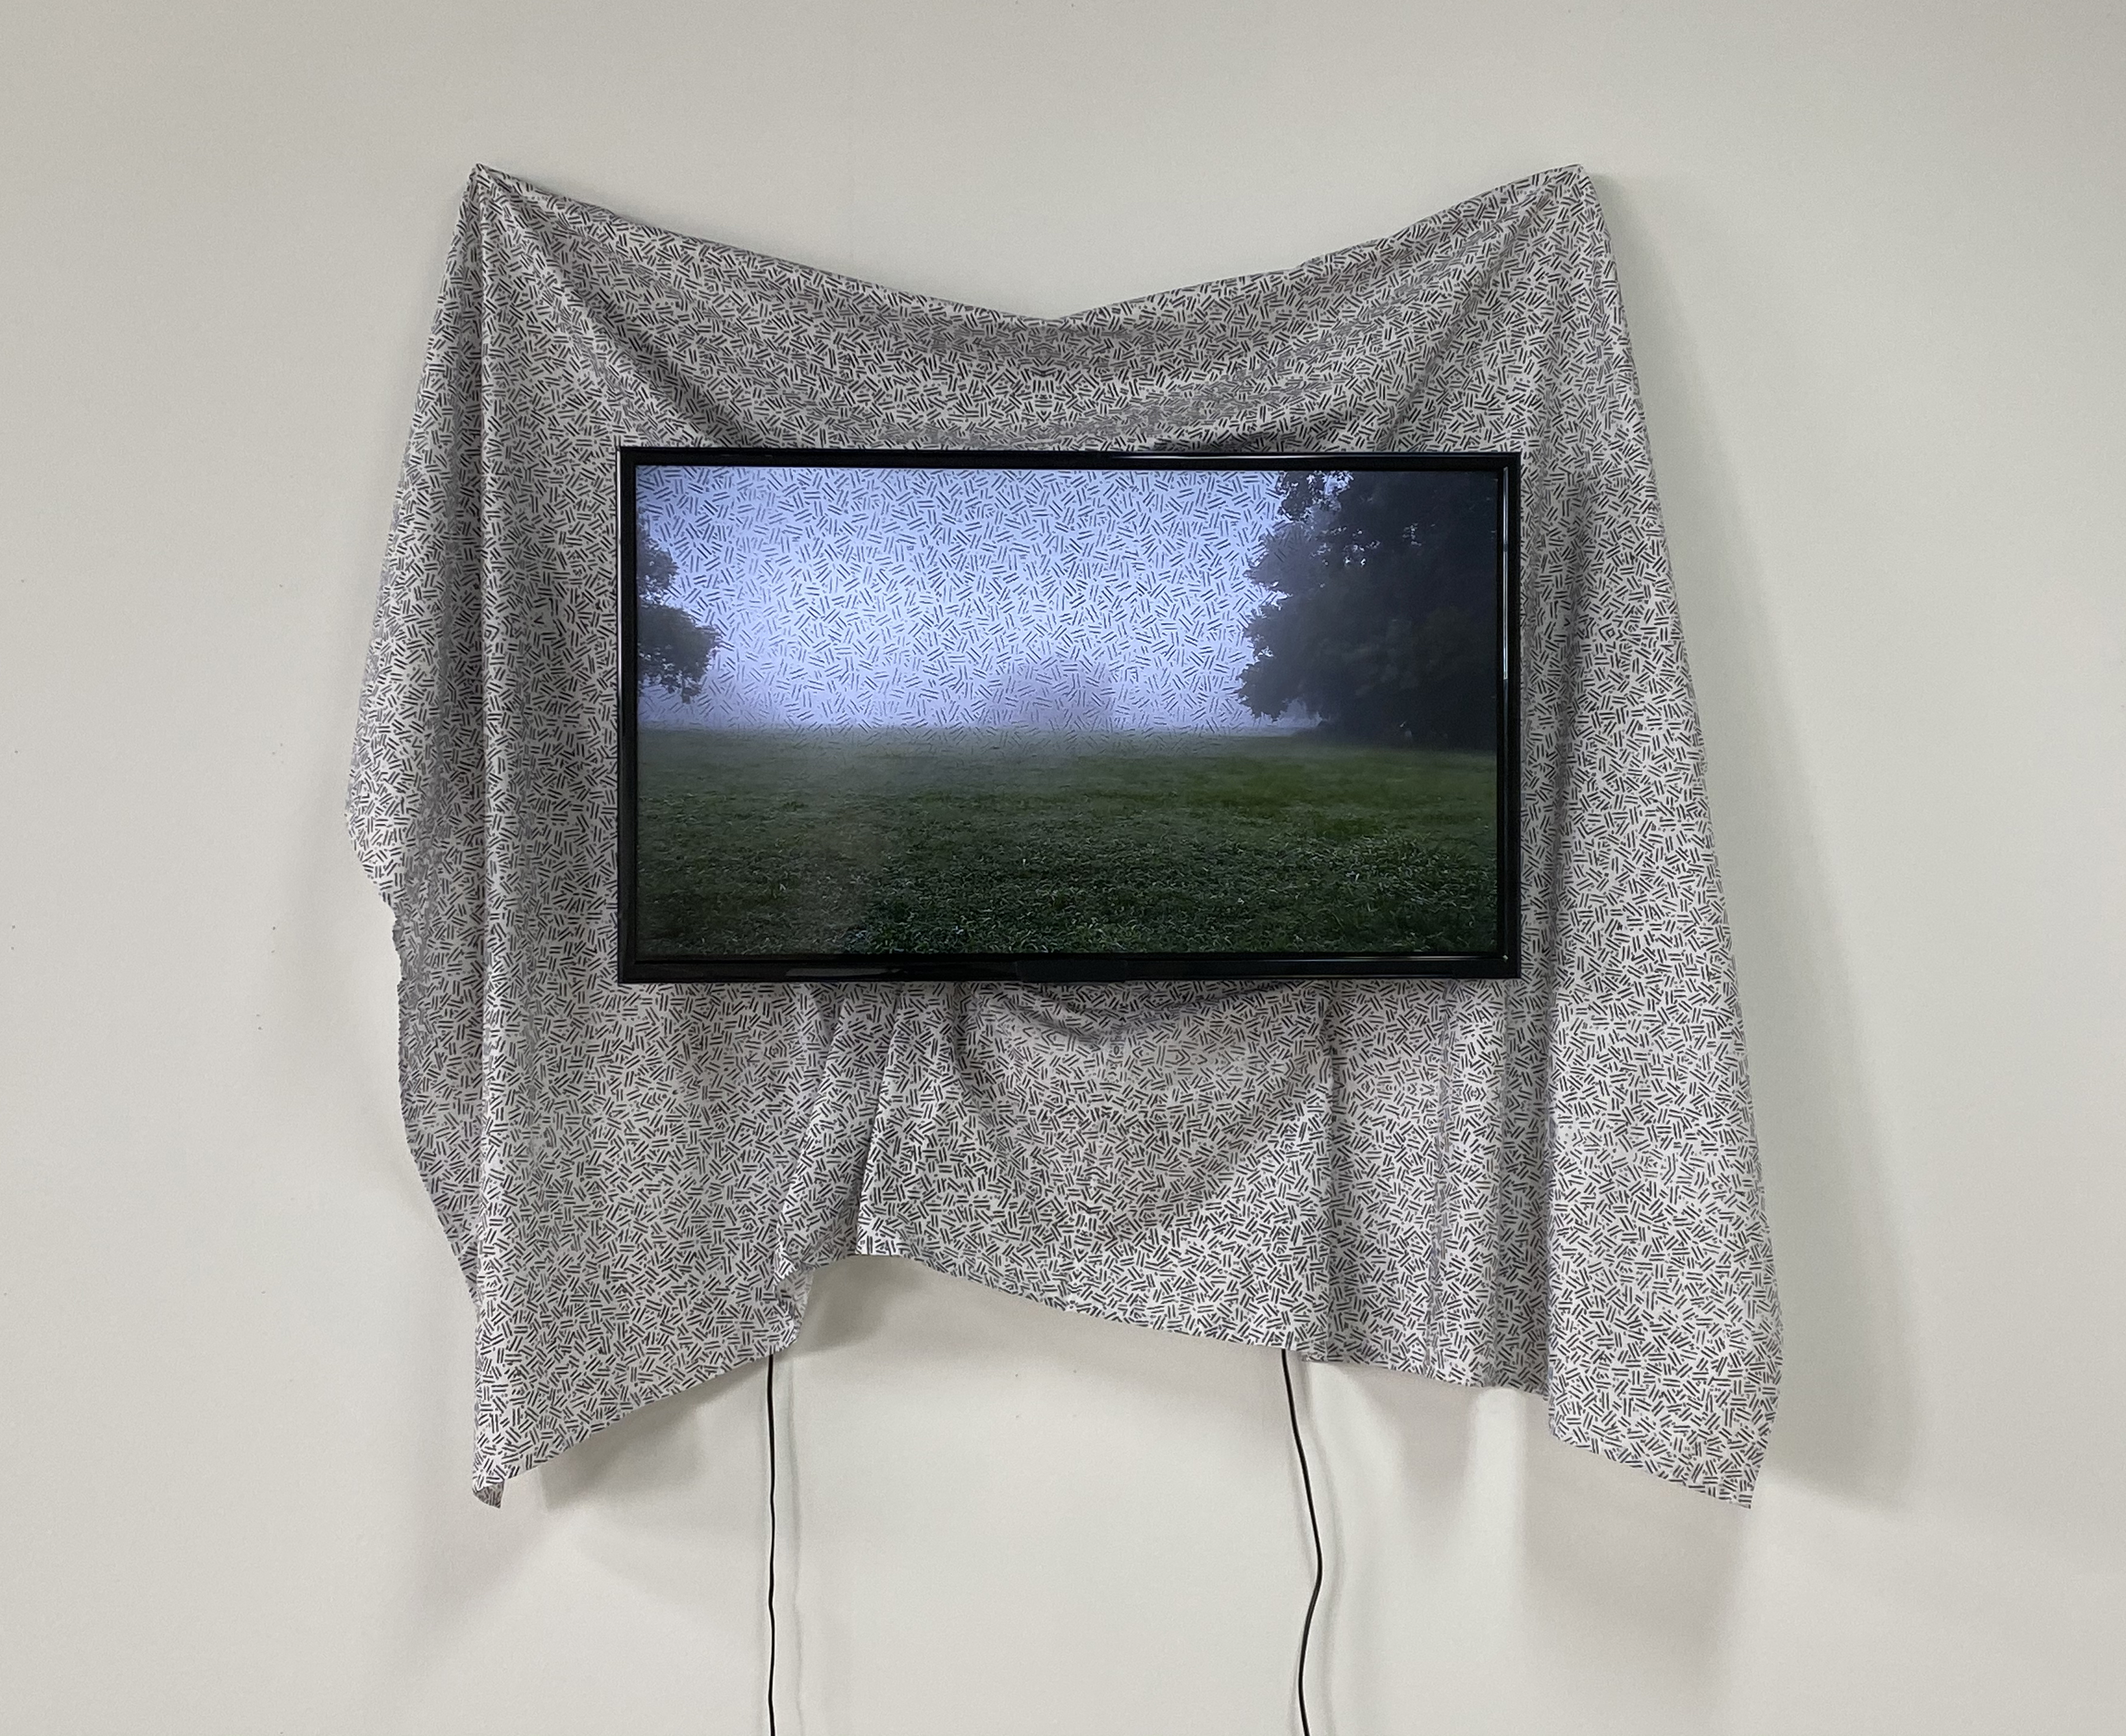  McLean Fahnestock, Secure World View (foggy), installation view, 2019